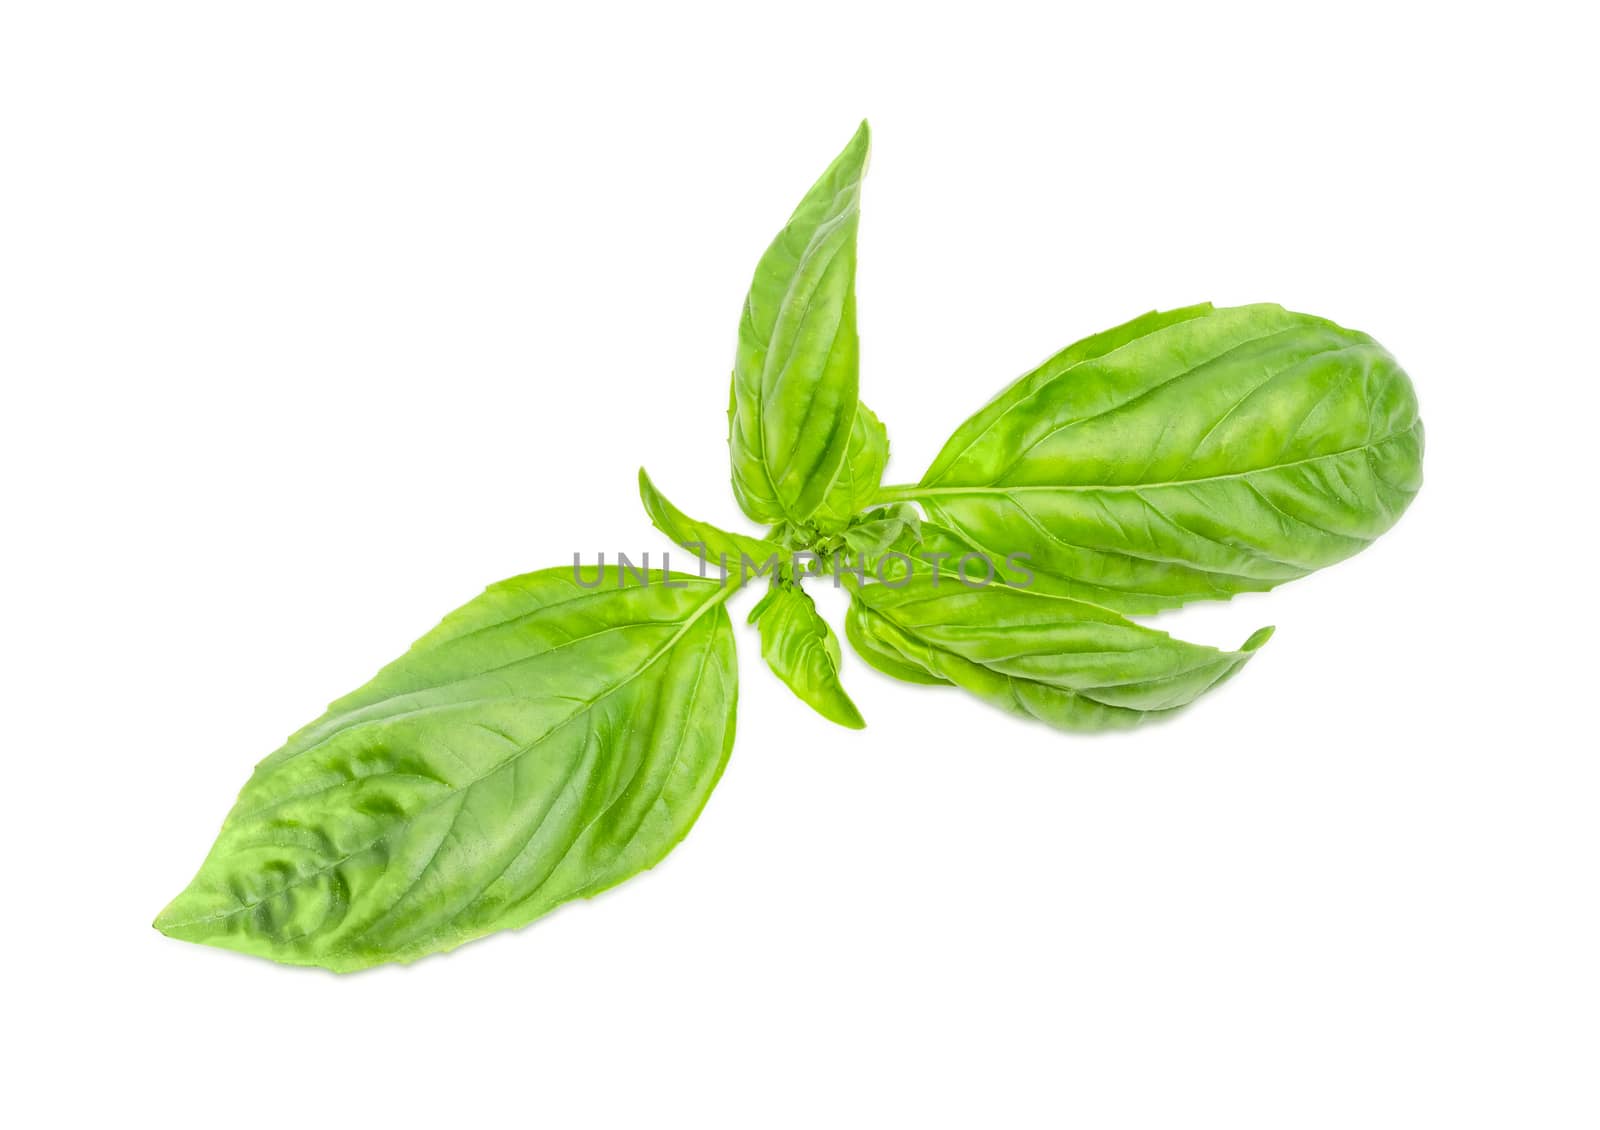 Twig of green basil on a white background by anmbph